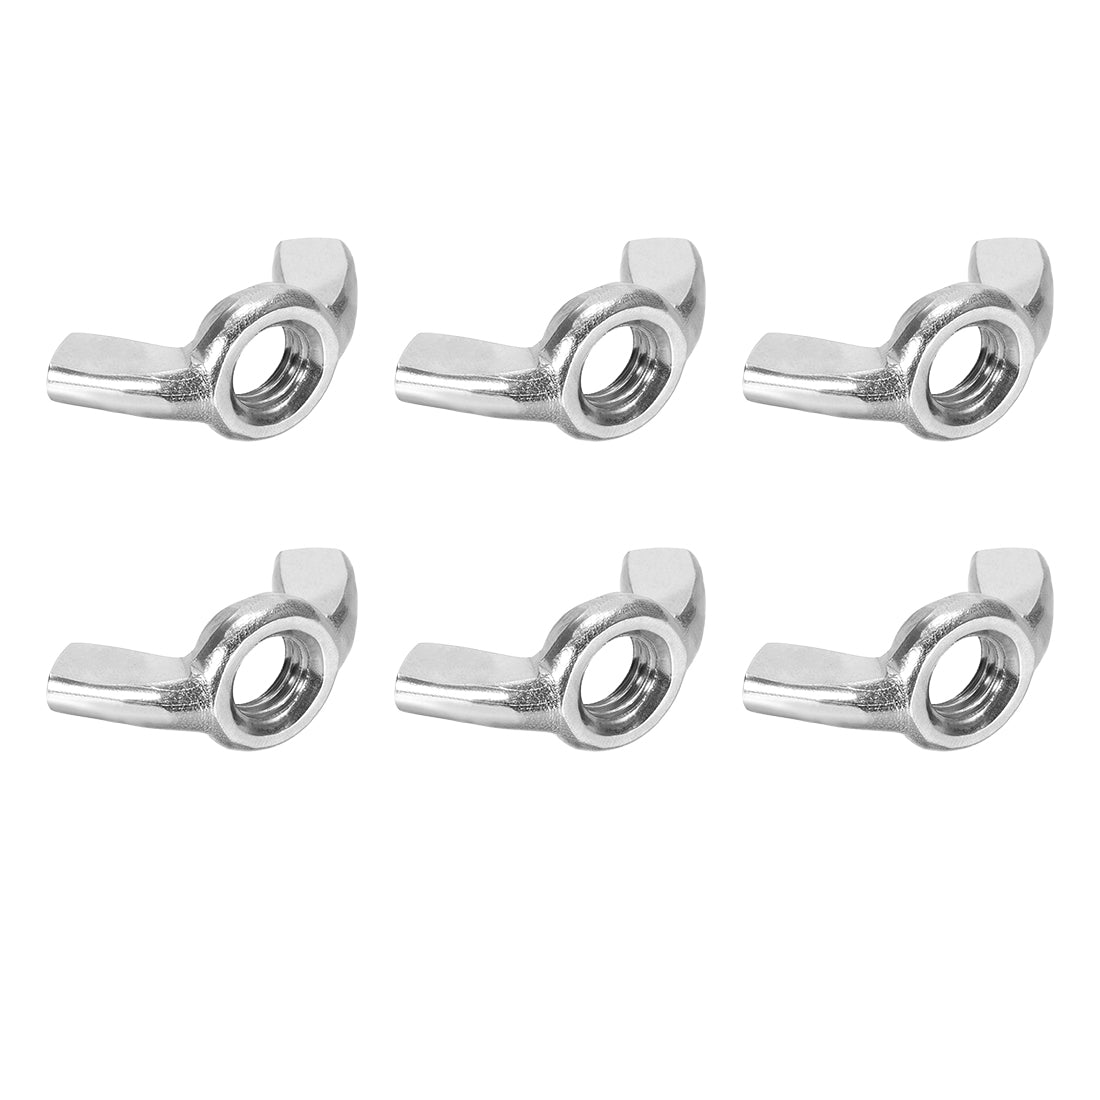 uxcell Uxcell Metric Wing Nuts, Carbon Steel Zinc Plated Hand Twist Tighten Ear Butterfly Nut, 6 Pcs